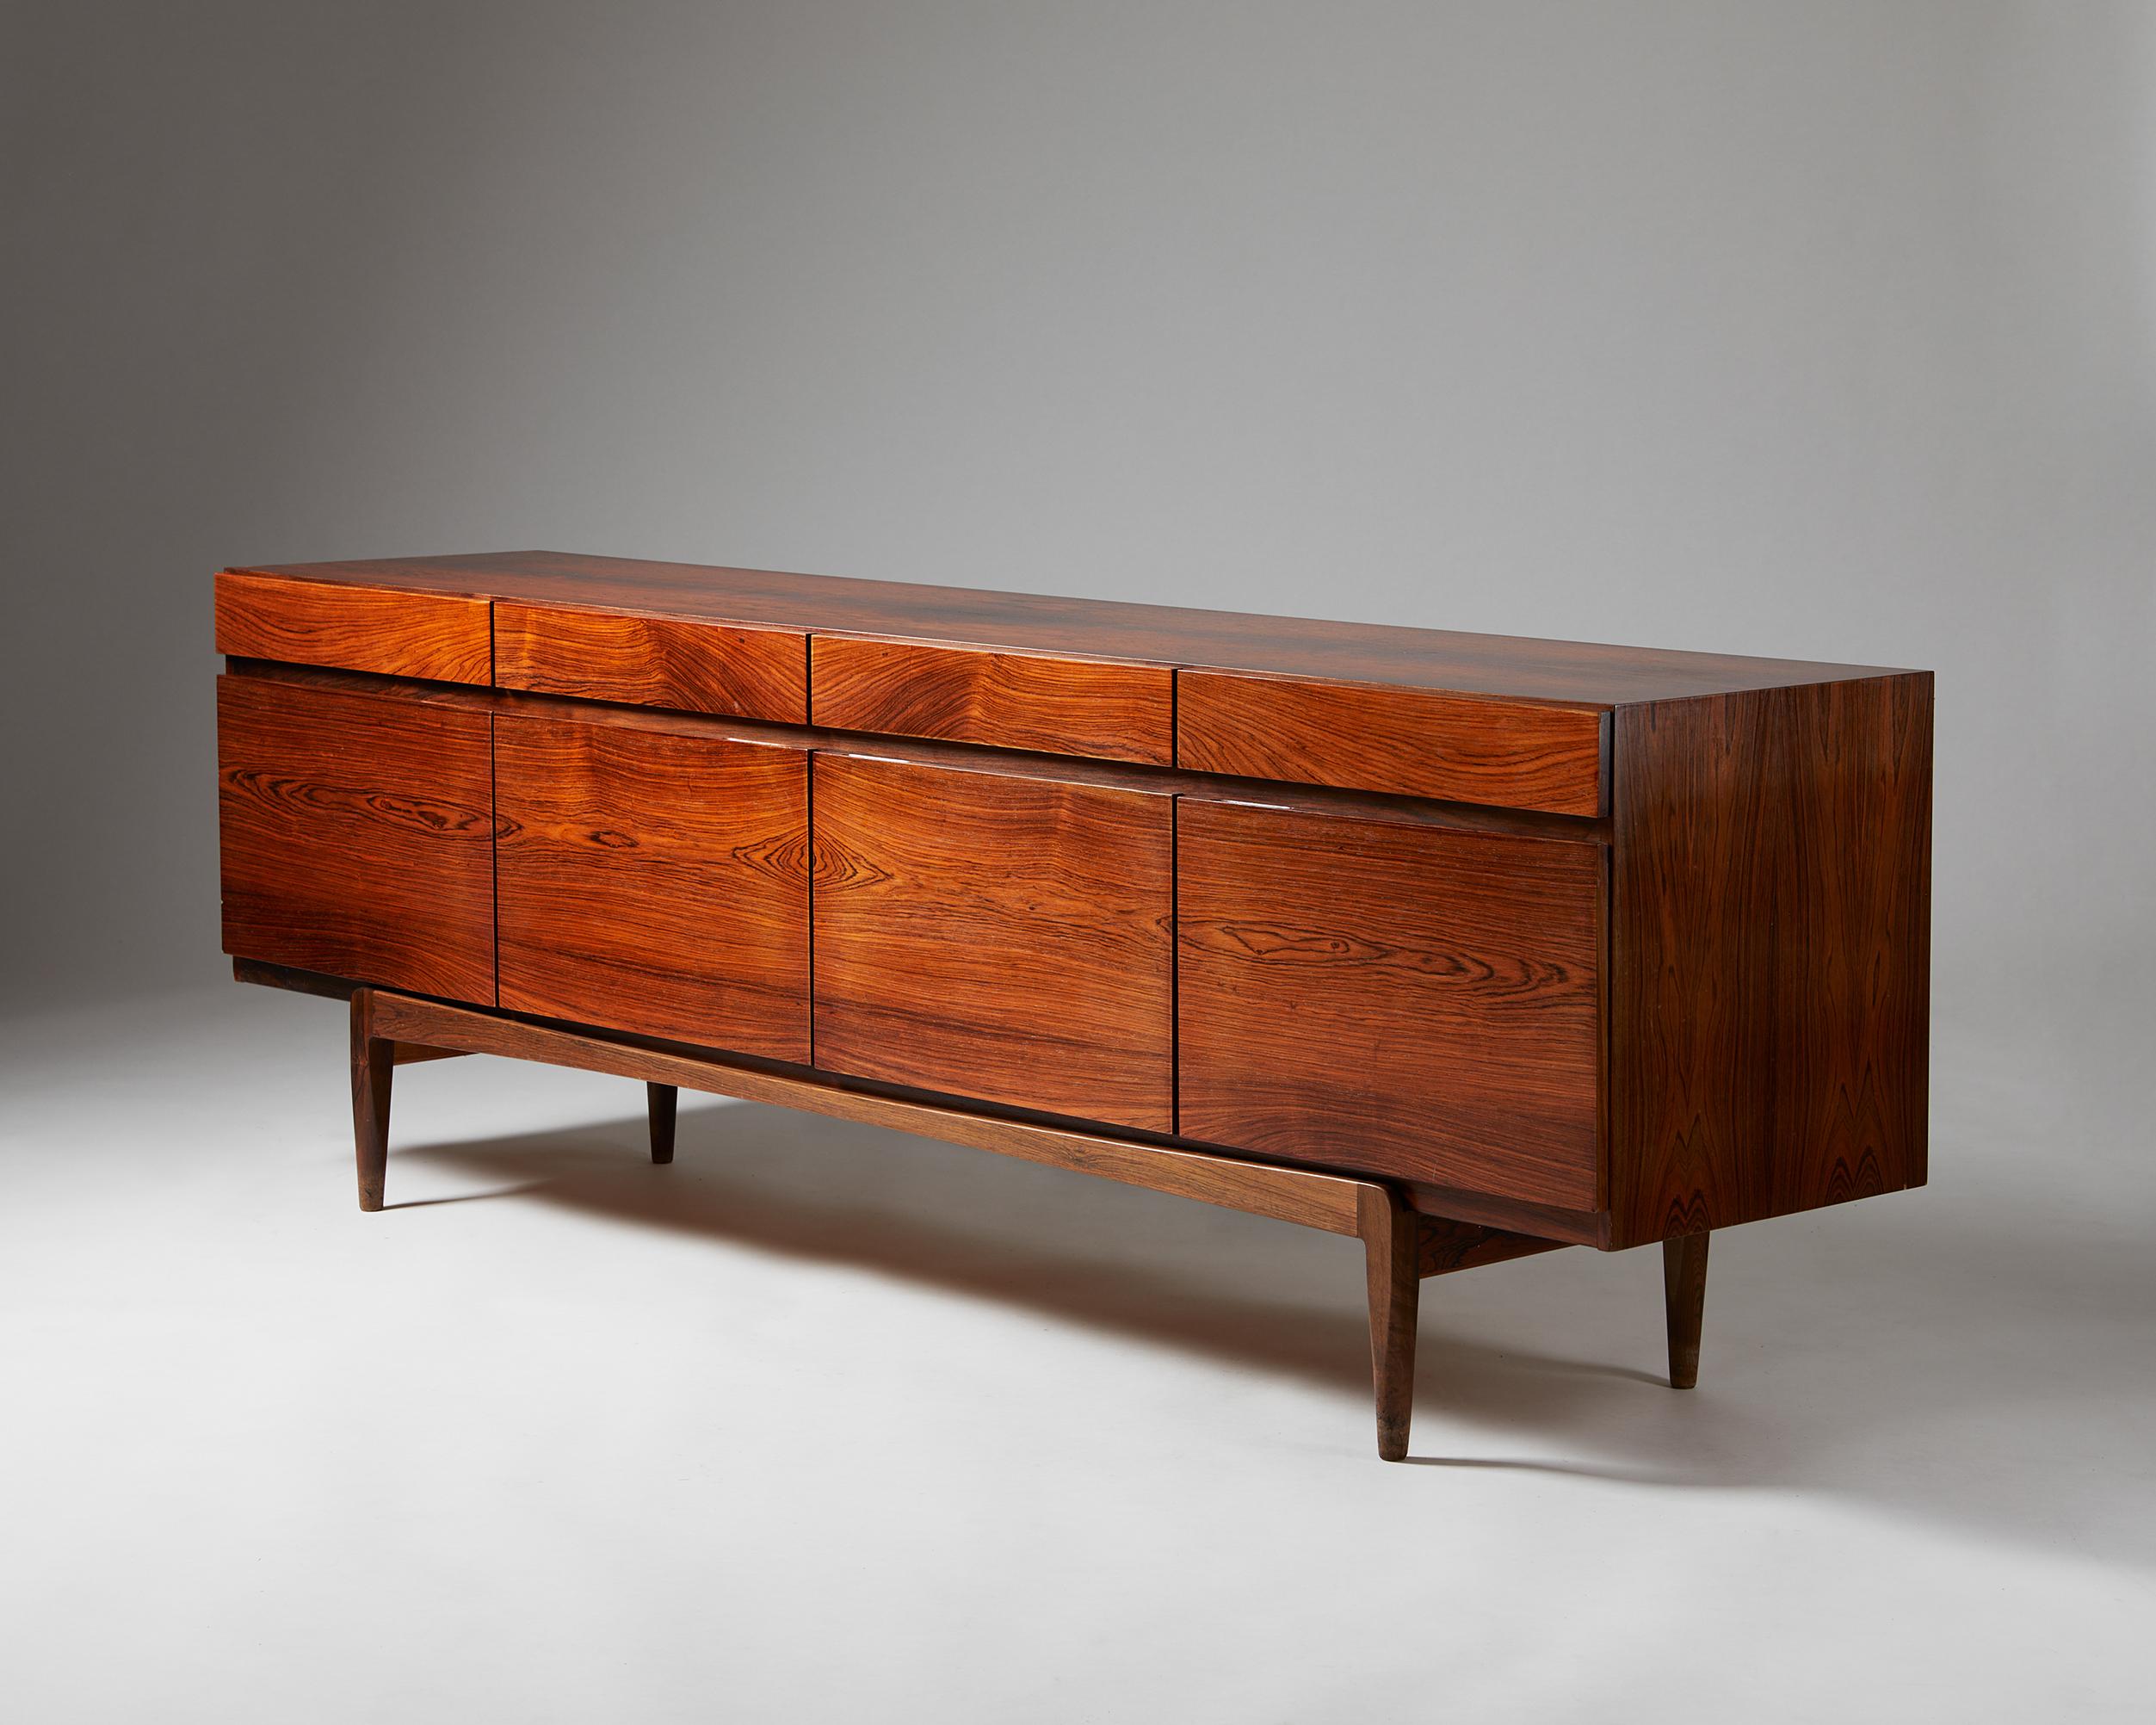 Sideboard model FA 66 designed by Ib Kofod-Larsen for Faarup Möbelfabrik,
Denmark. 1960s.
Rosewood.

Stamped.

The clean lines of Ib Kofod-Larsen’s model FA 66 in rosewood make it a notable Scandinavian mid-century collectable. Remarkably, it